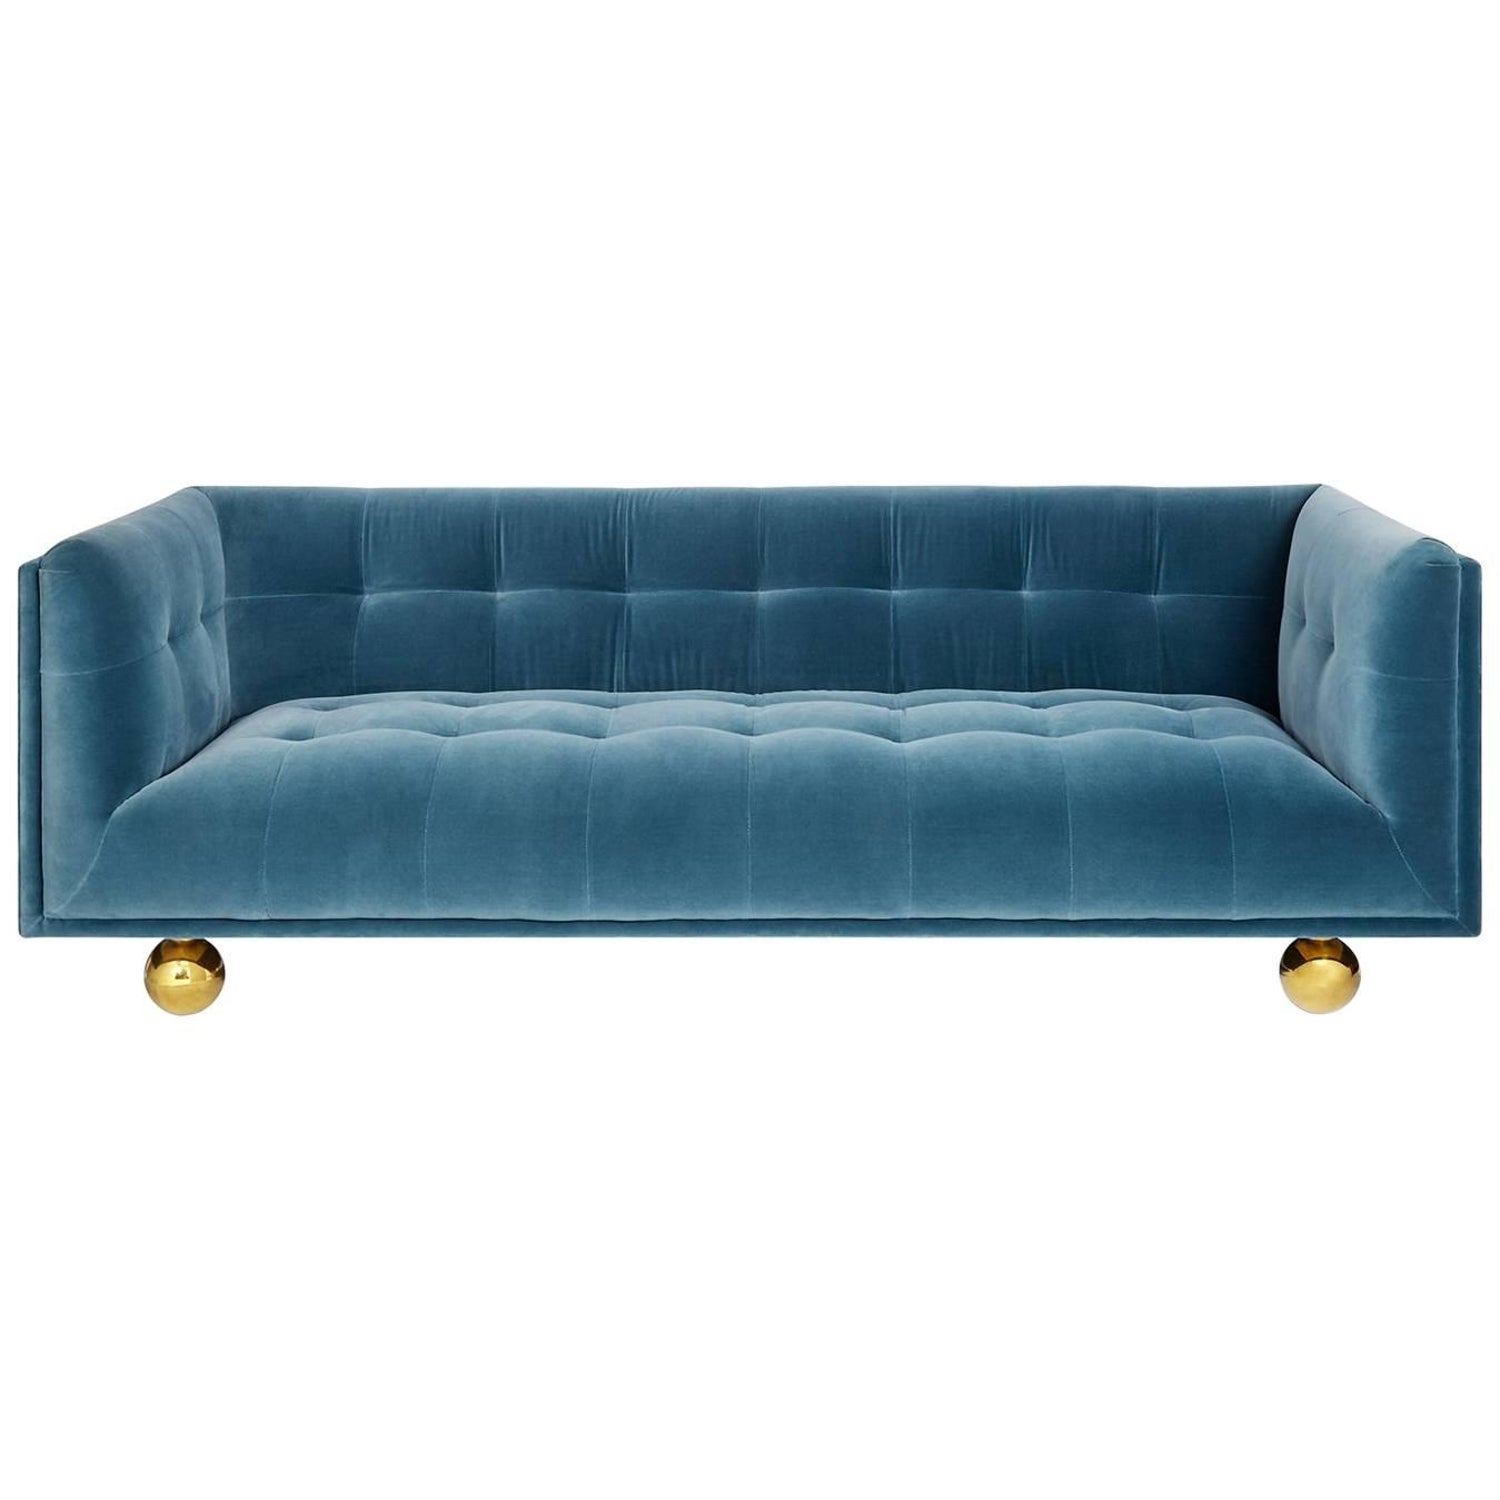 Chesterfield Furniture 132 For Sale At 1stdibs